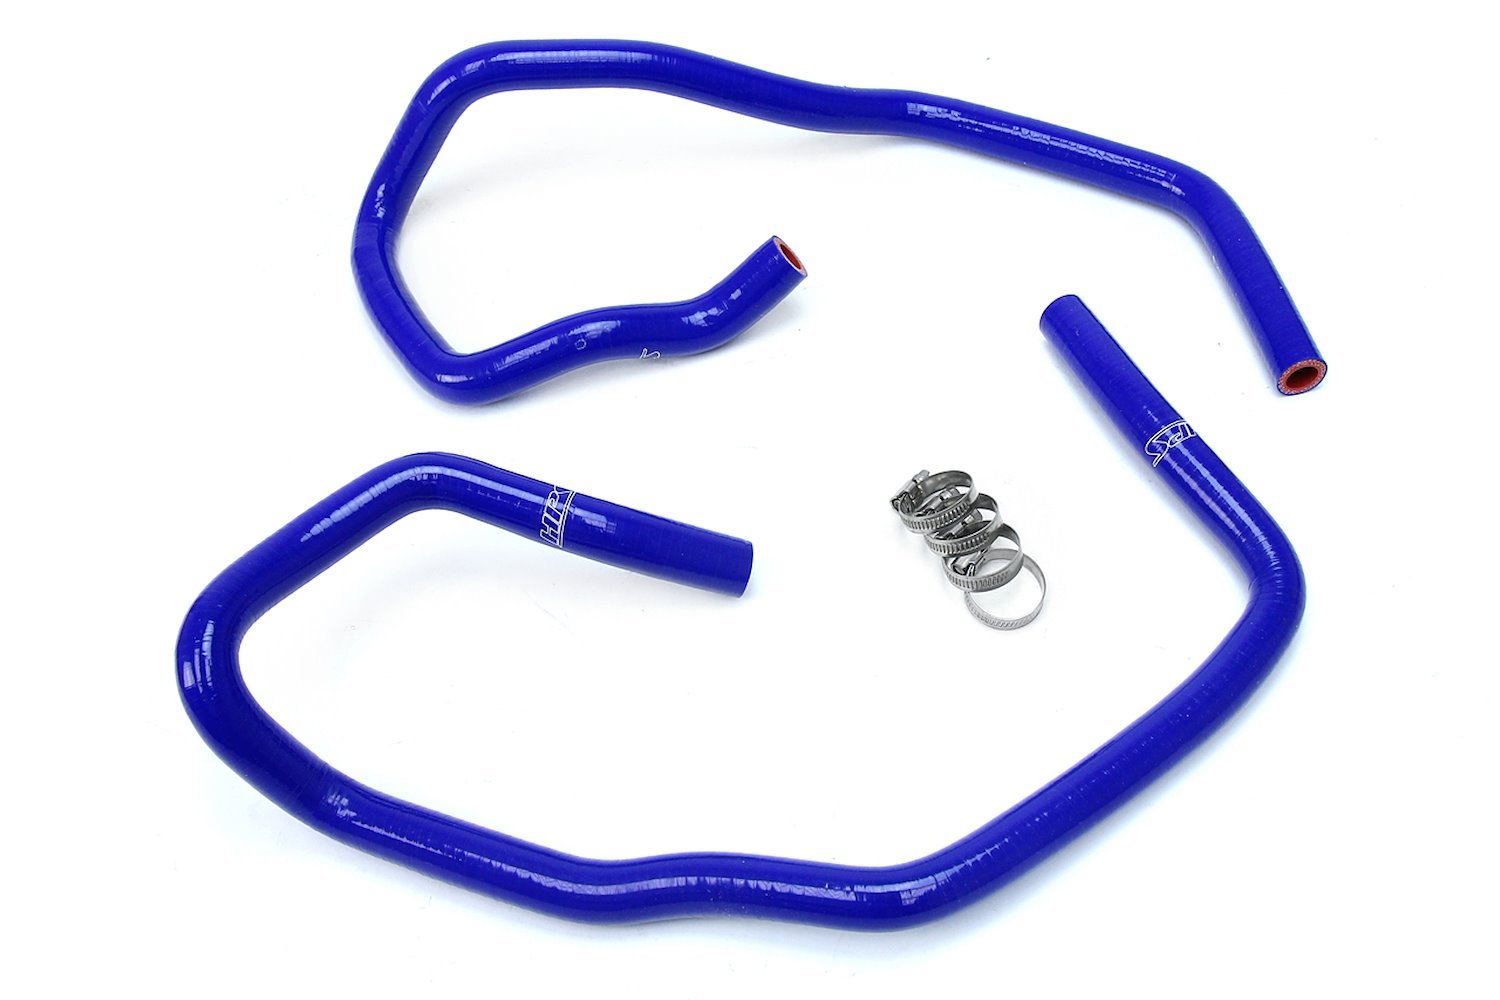 57-1694-BLUE Heater Hose Kit, High-Temp 3-Ply Reinforced Silicone, Replace OEM Rubber Heater Coolant Hoses